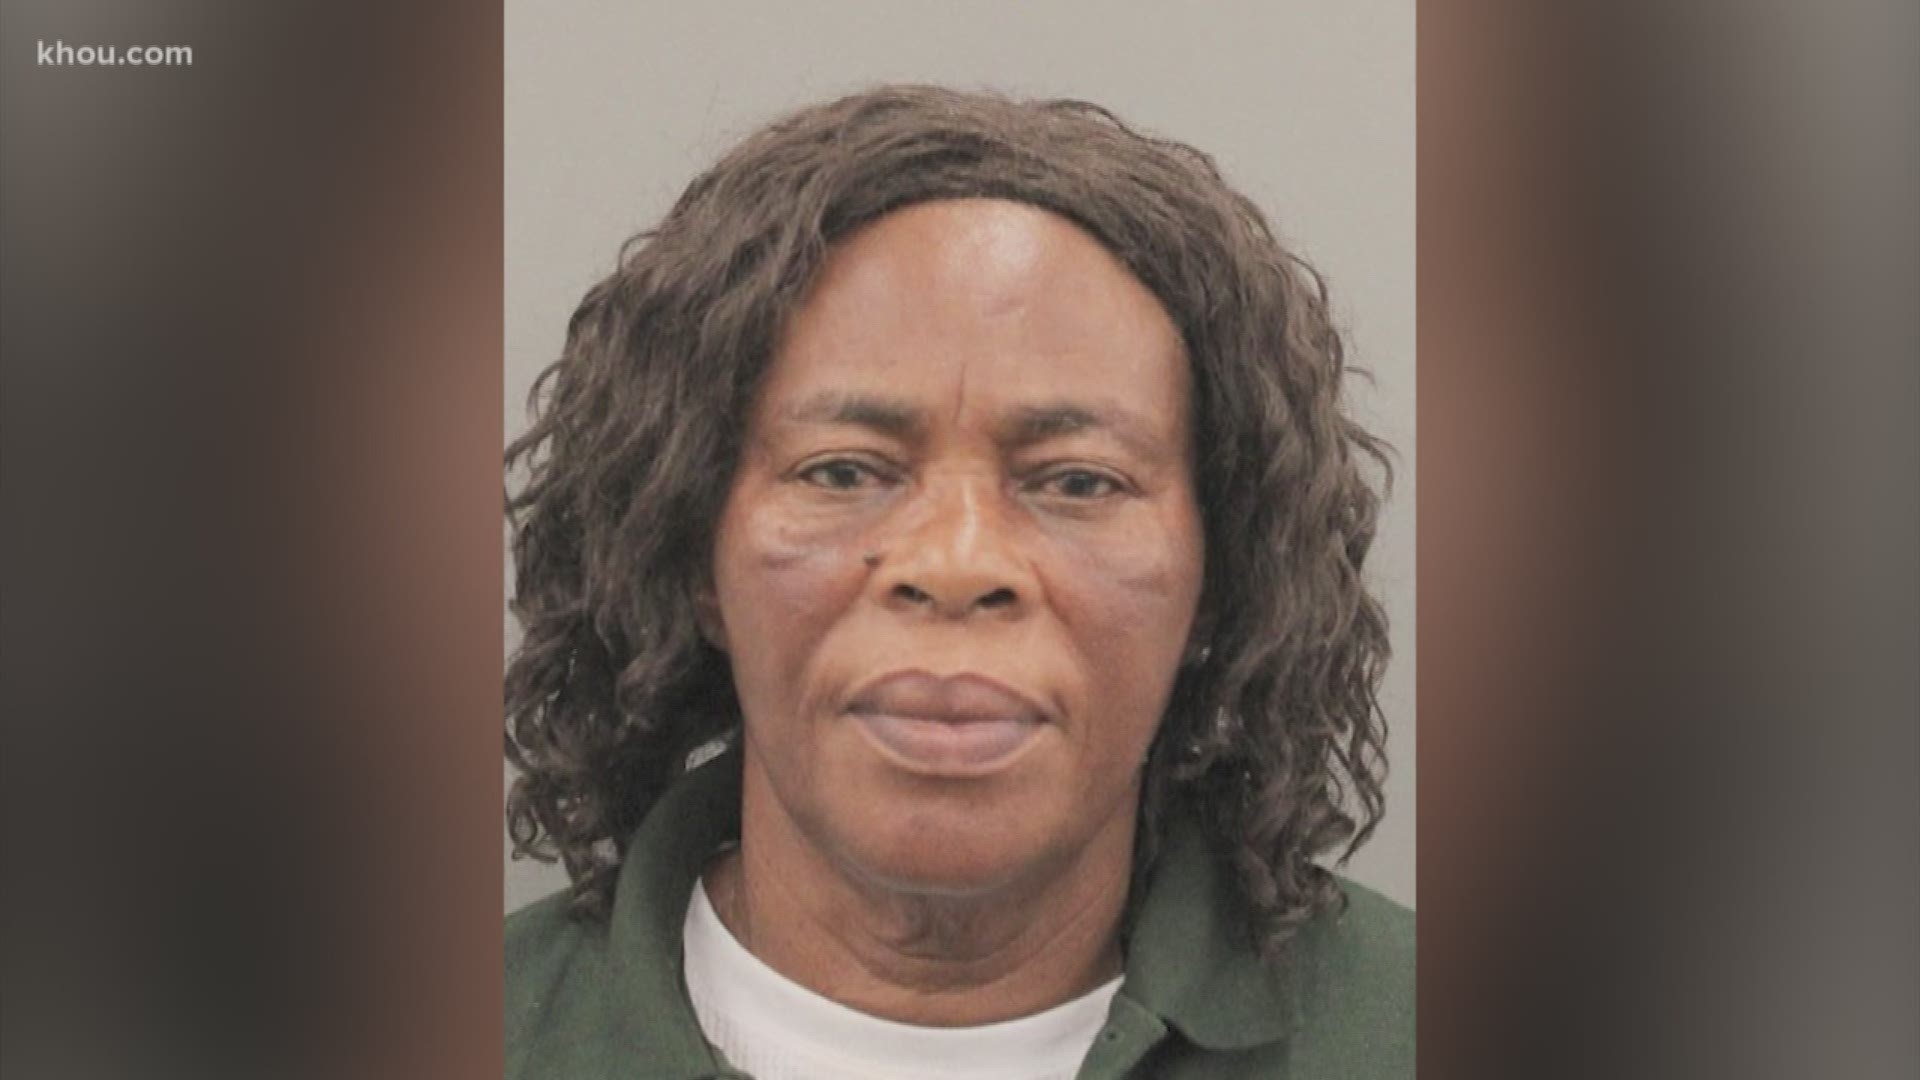 The employee, who was identified as 56-year-old Chinyere Iheagwam Thursday morning, is being charged with aggravated assault with a deadly weapon.